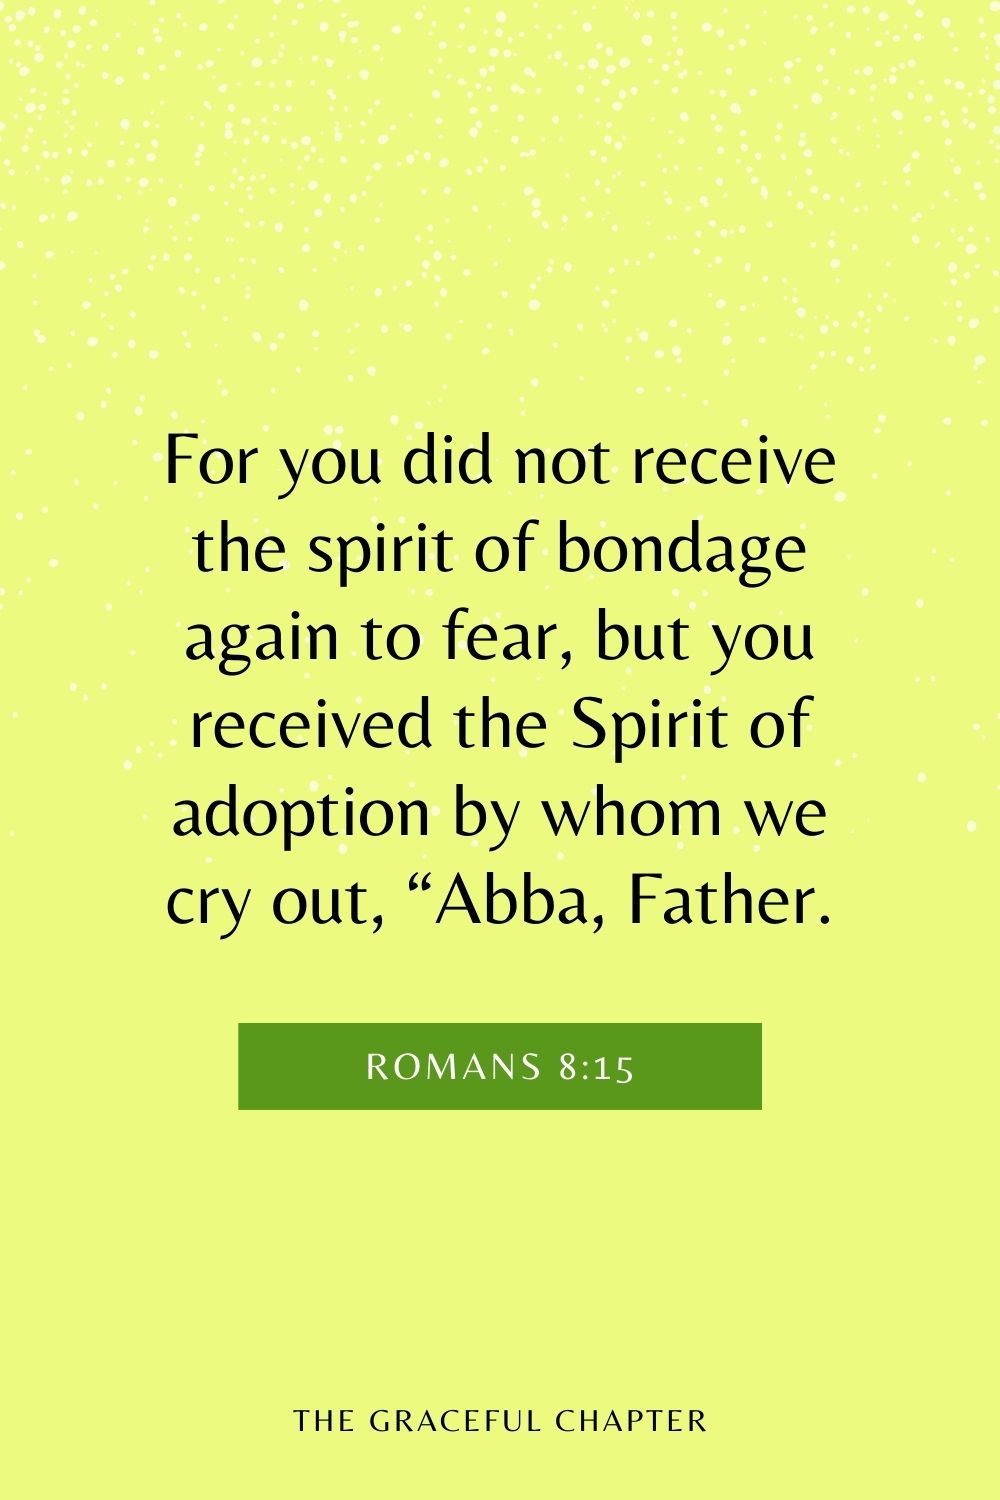 For you did not receive the spirit of bondage again to fear, but you received the Spirit of adoption by whom we cry out, “Abba, Father. Romans 8:15